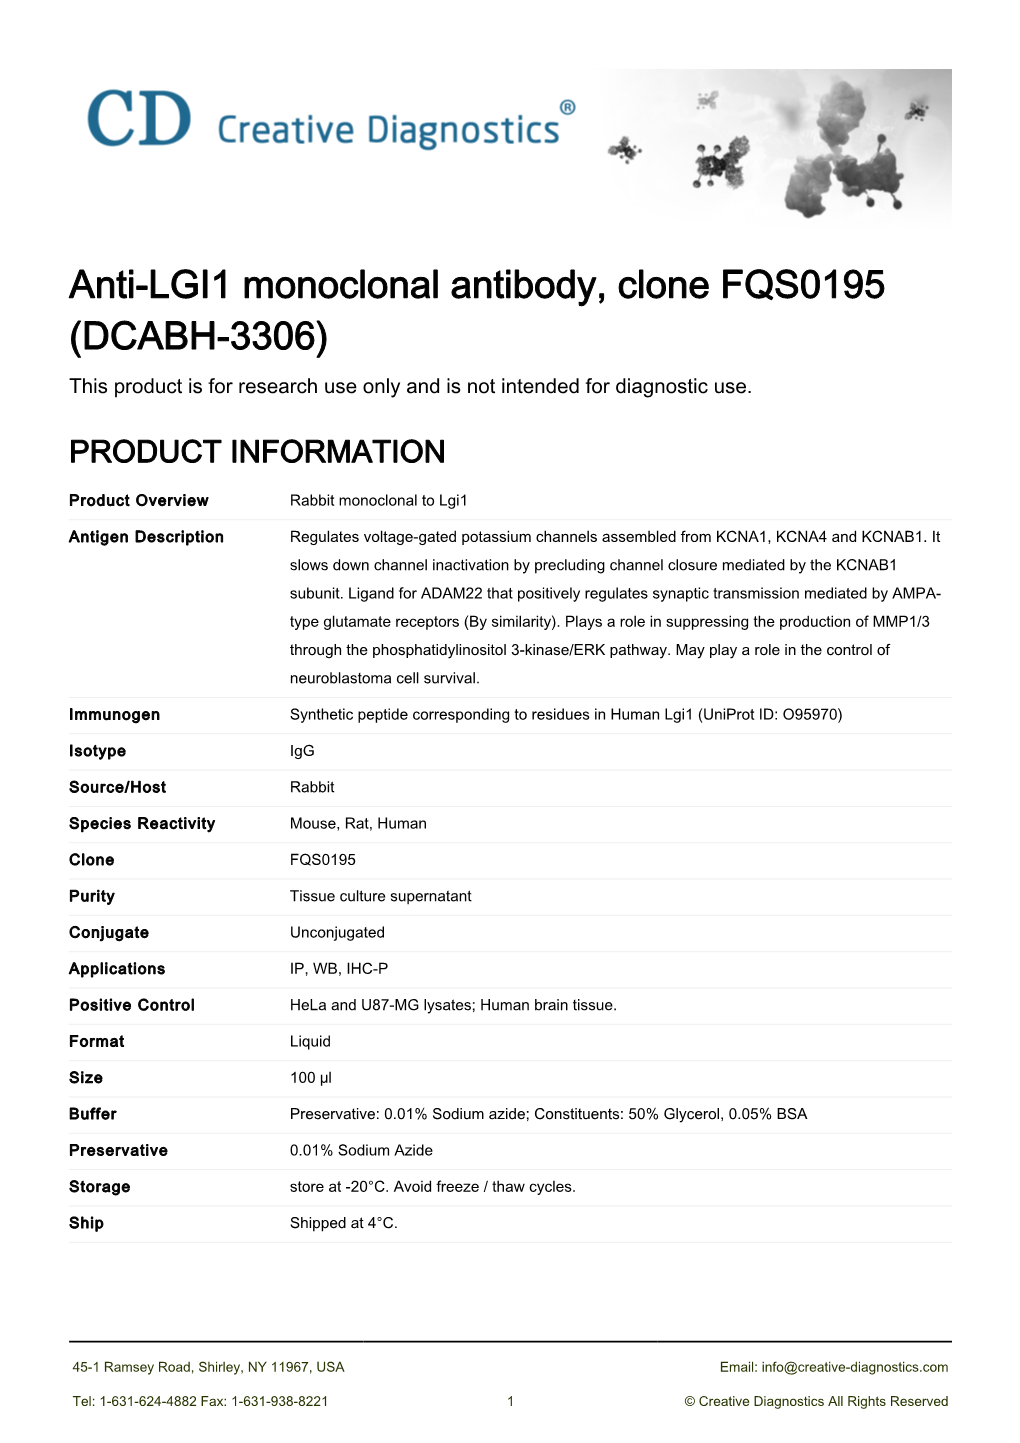 Anti-LGI1 Monoclonal Antibody, Clone FQS0195 (DCABH-3306) This Product Is for Research Use Only and Is Not Intended for Diagnostic Use